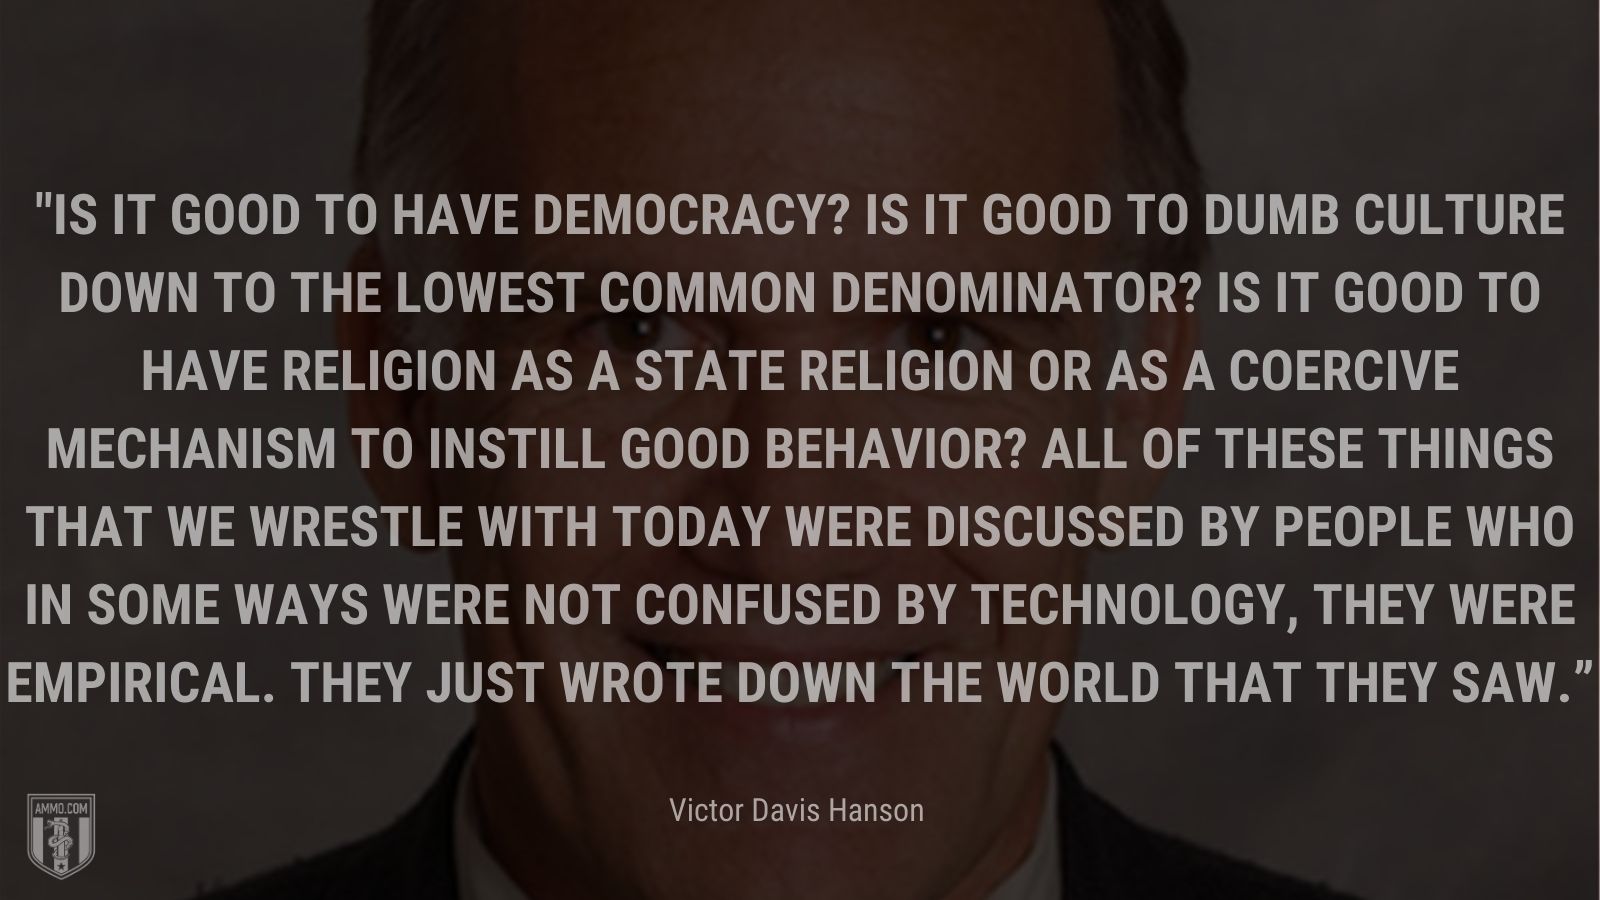 “Is it good to have democracy? Is it good to dumb culture down to the lowest common denominator? Is it good to have religion as a state religion or as a coercive mechanism to instill good behavior? All of these things that we wrestle with today were discussed by people who in some ways were not confused by technology, they were empirical. They just wrote down the world that they saw.” - Victor Davis Hanson